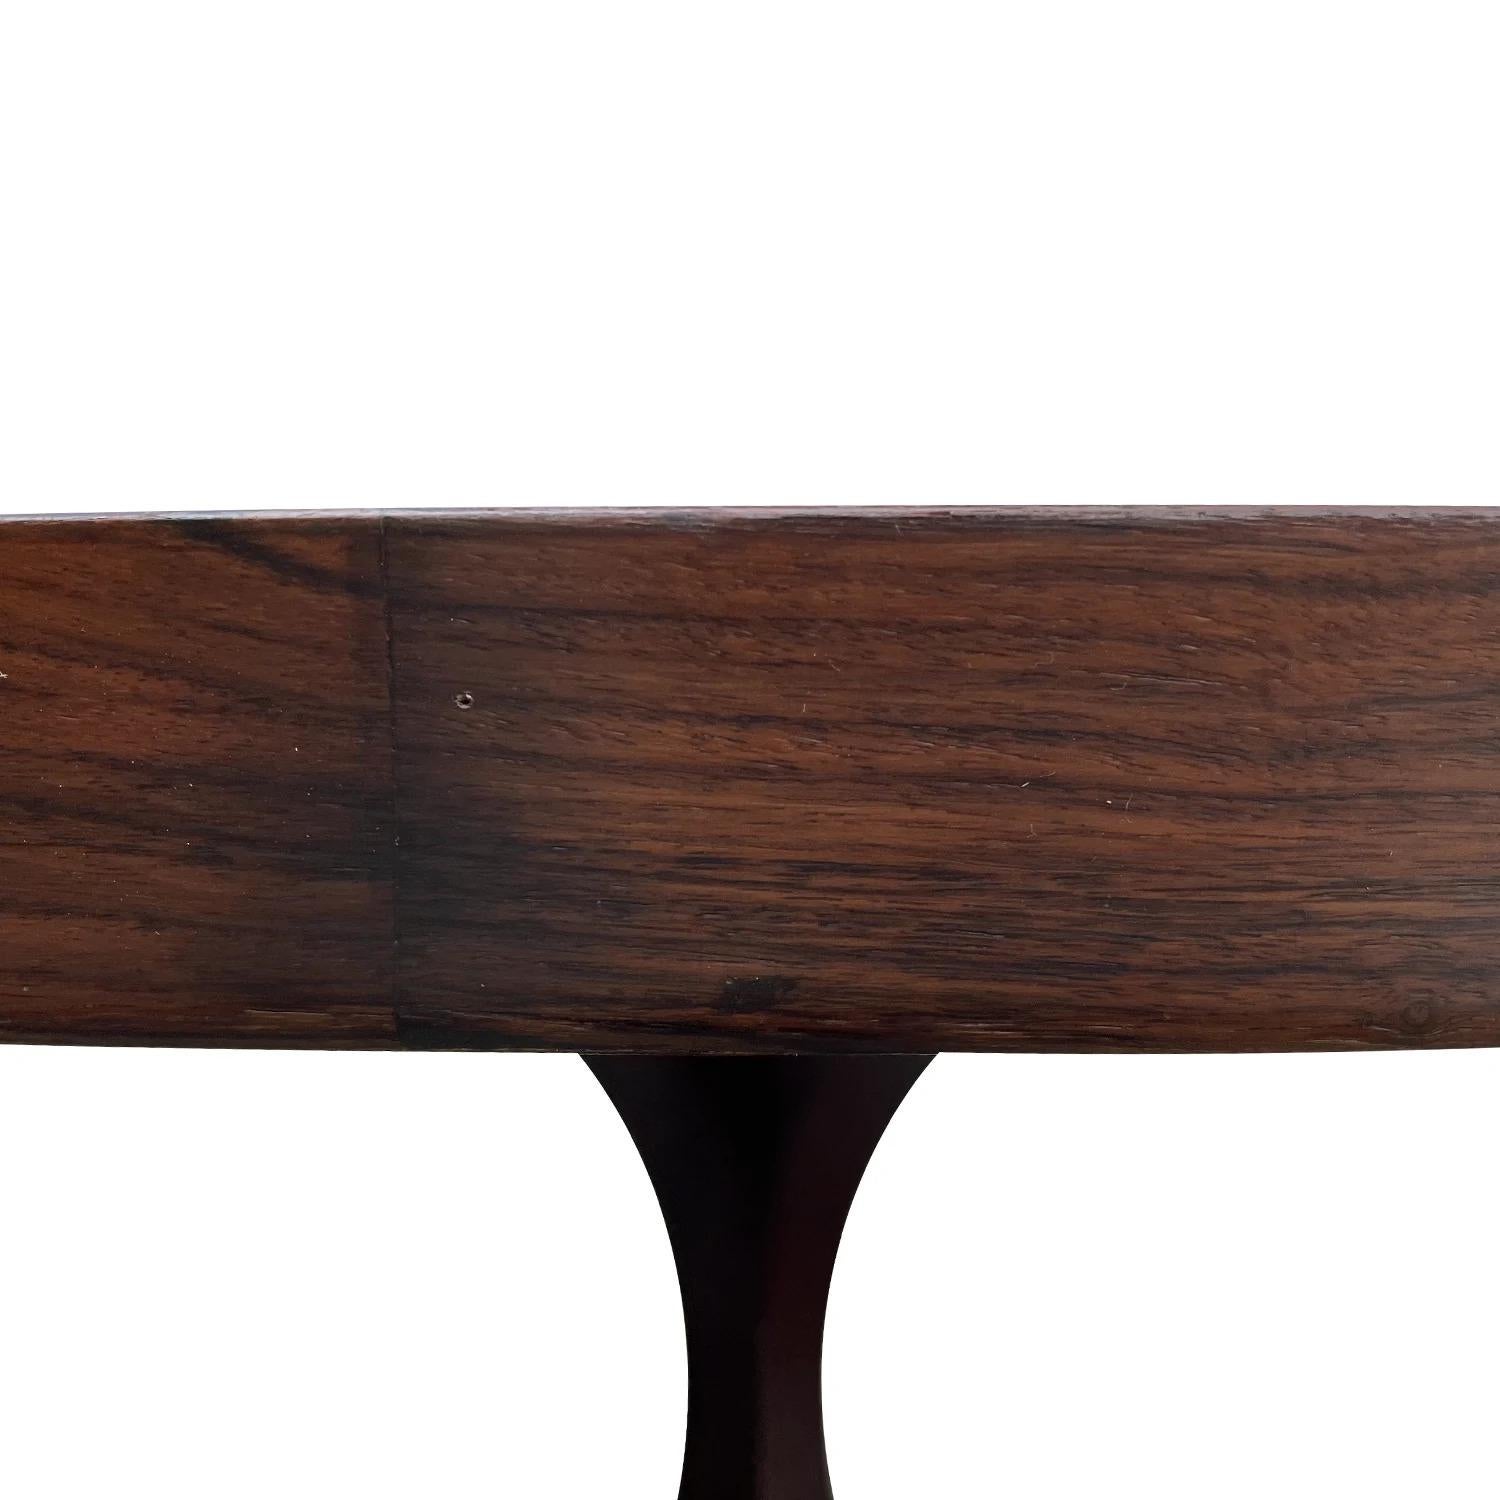 20th Century Italian Modern Vintage Polished Rosewood Dining, Center Table For Sale 6